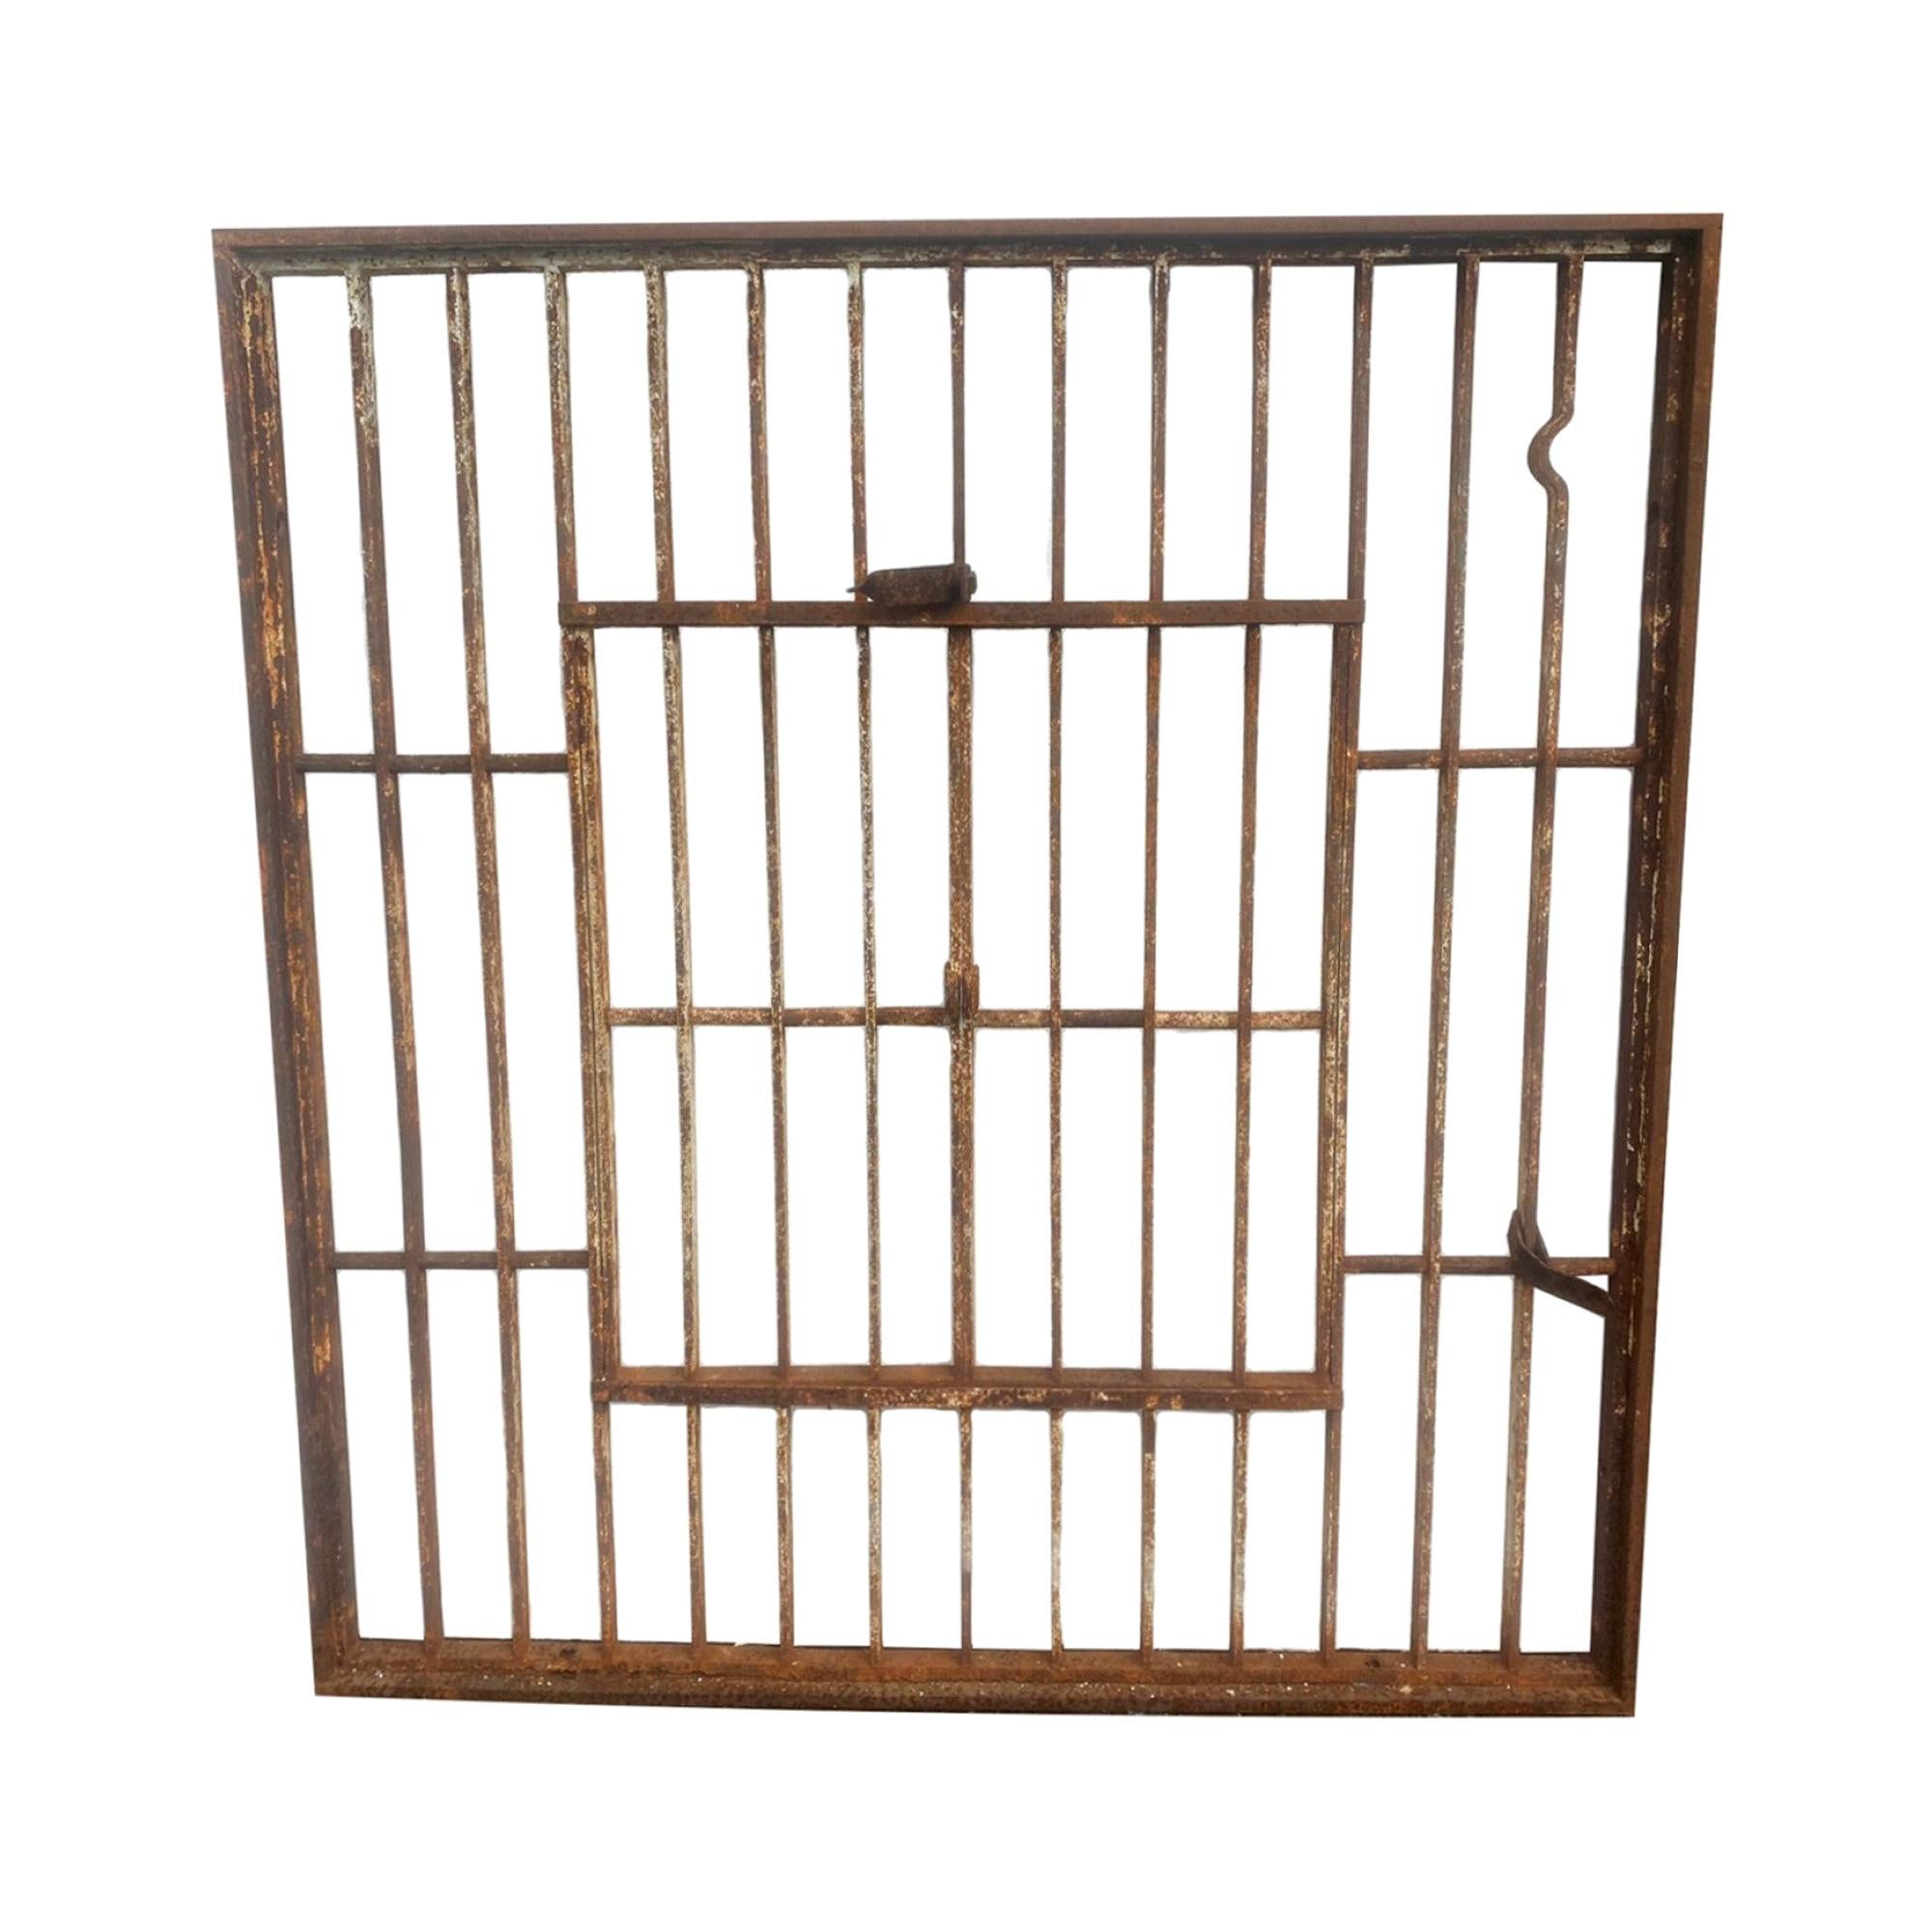 1920s Salvaged Wrought Iron Jail Style Window with Double Door Opening